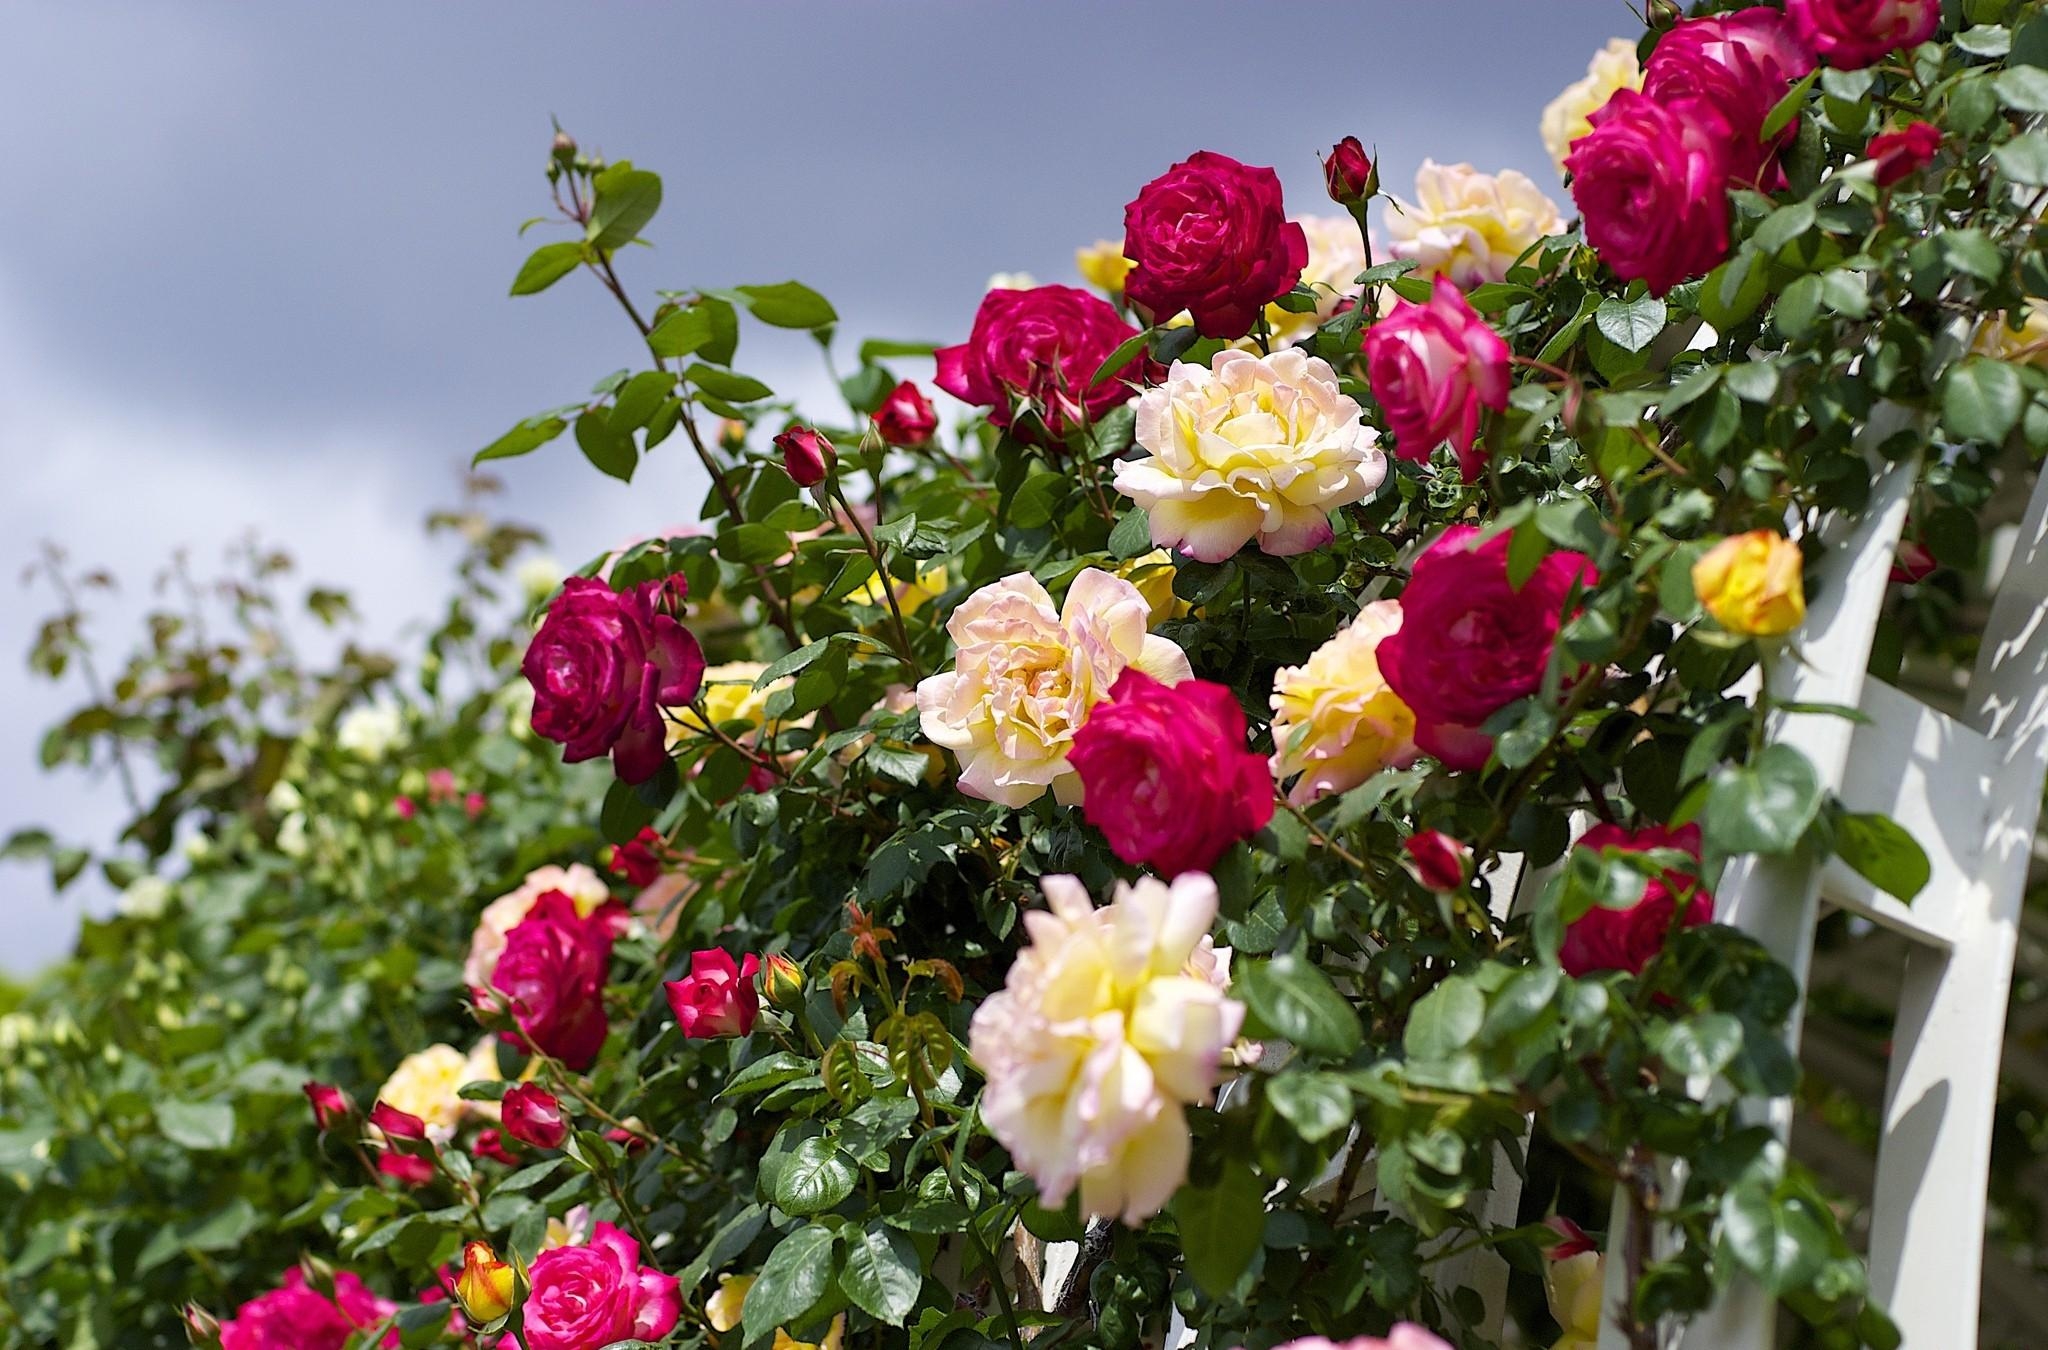 roses, flowers, sky, bloom, flowering, garden, handsomely, it's beautiful wallpapers for tablet